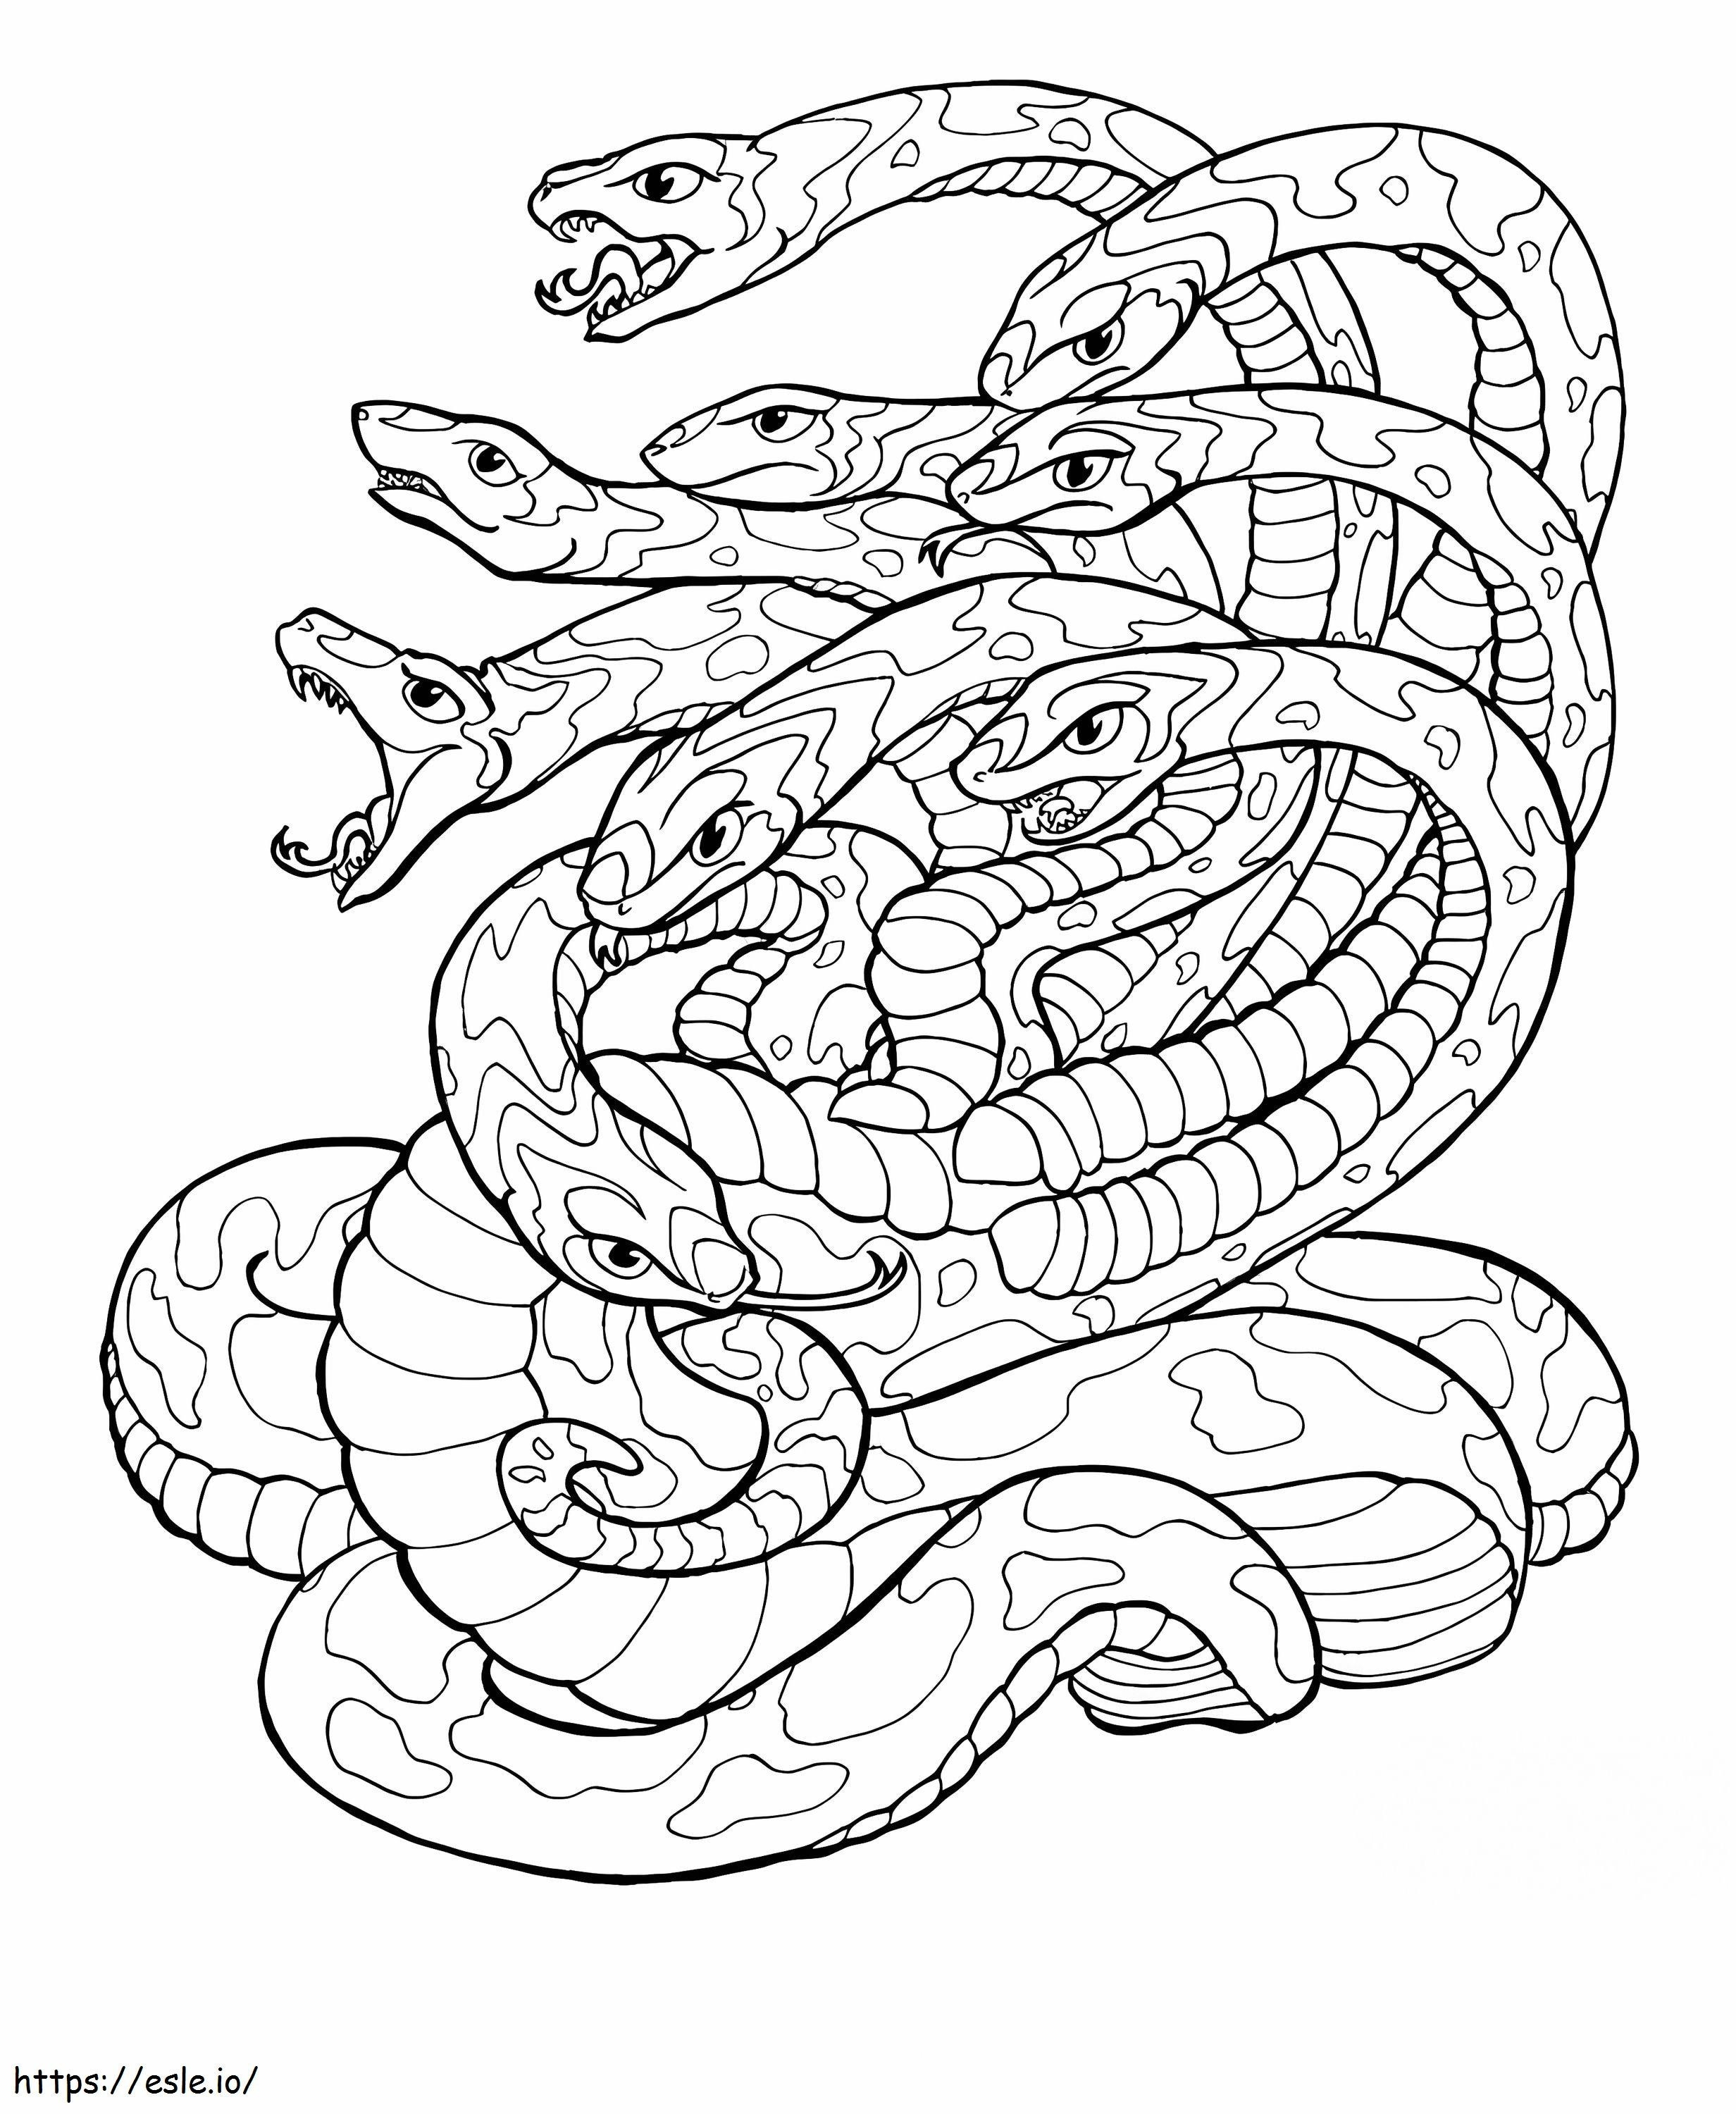 Monster Hydra coloring page